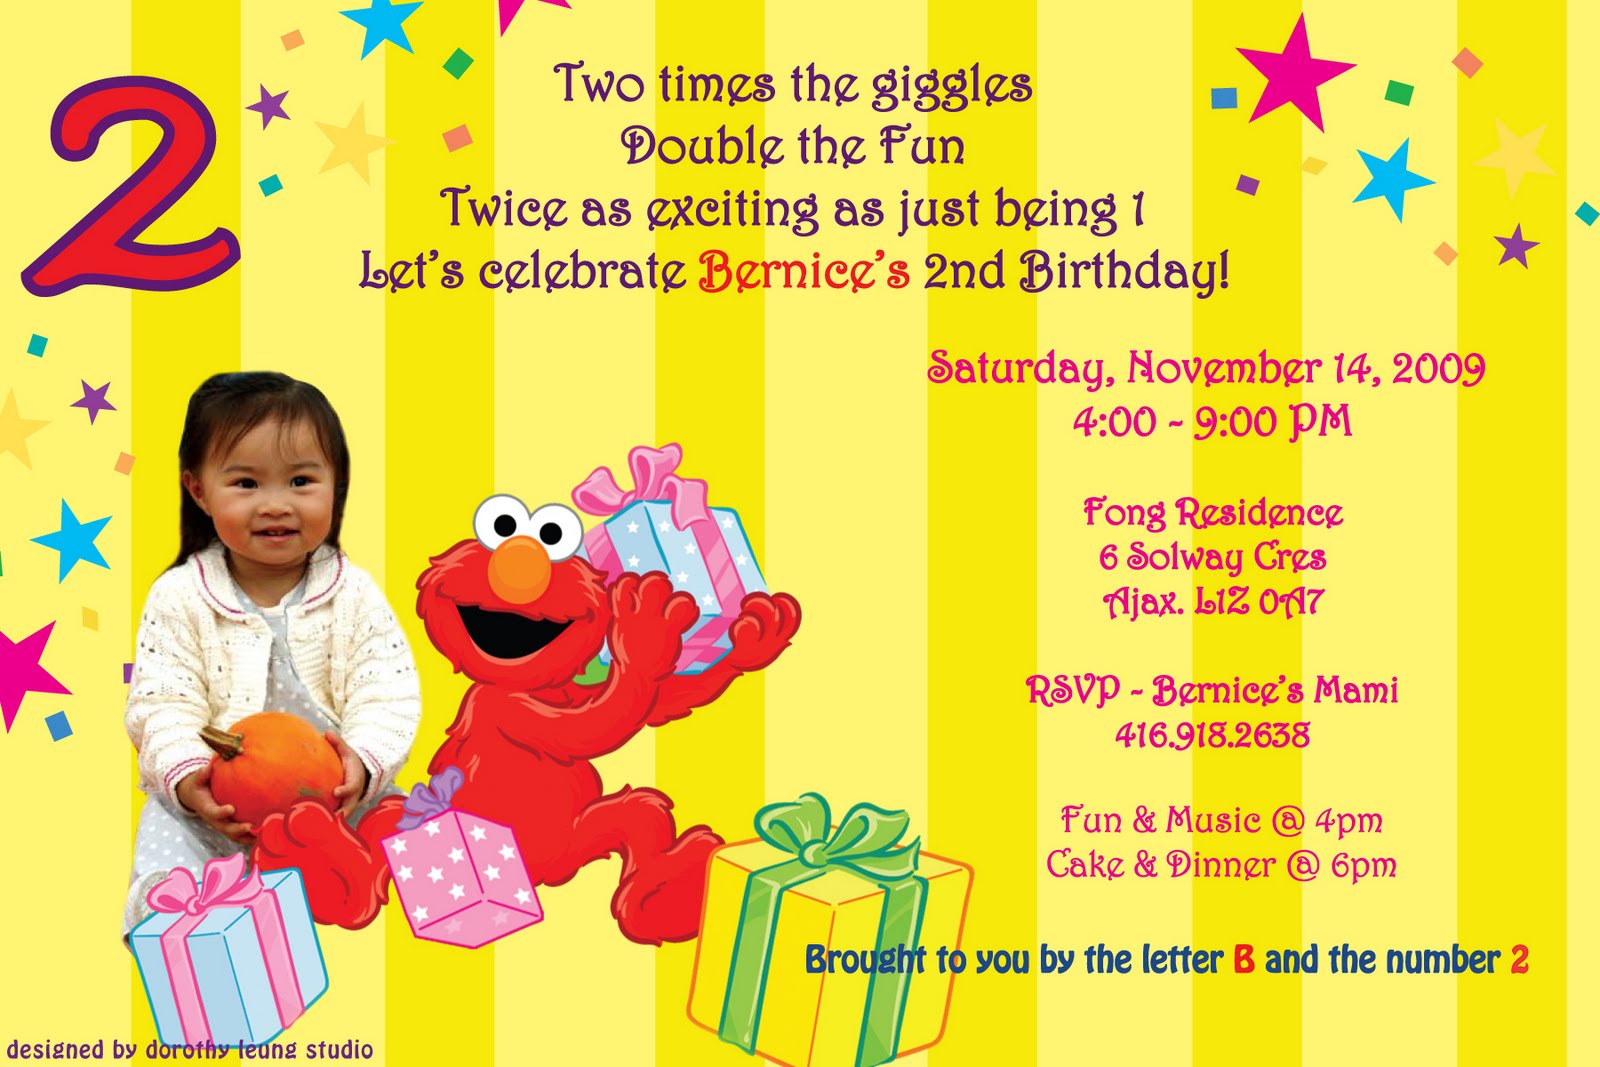 The Fong Family: Bernices 2nd Birthday Party